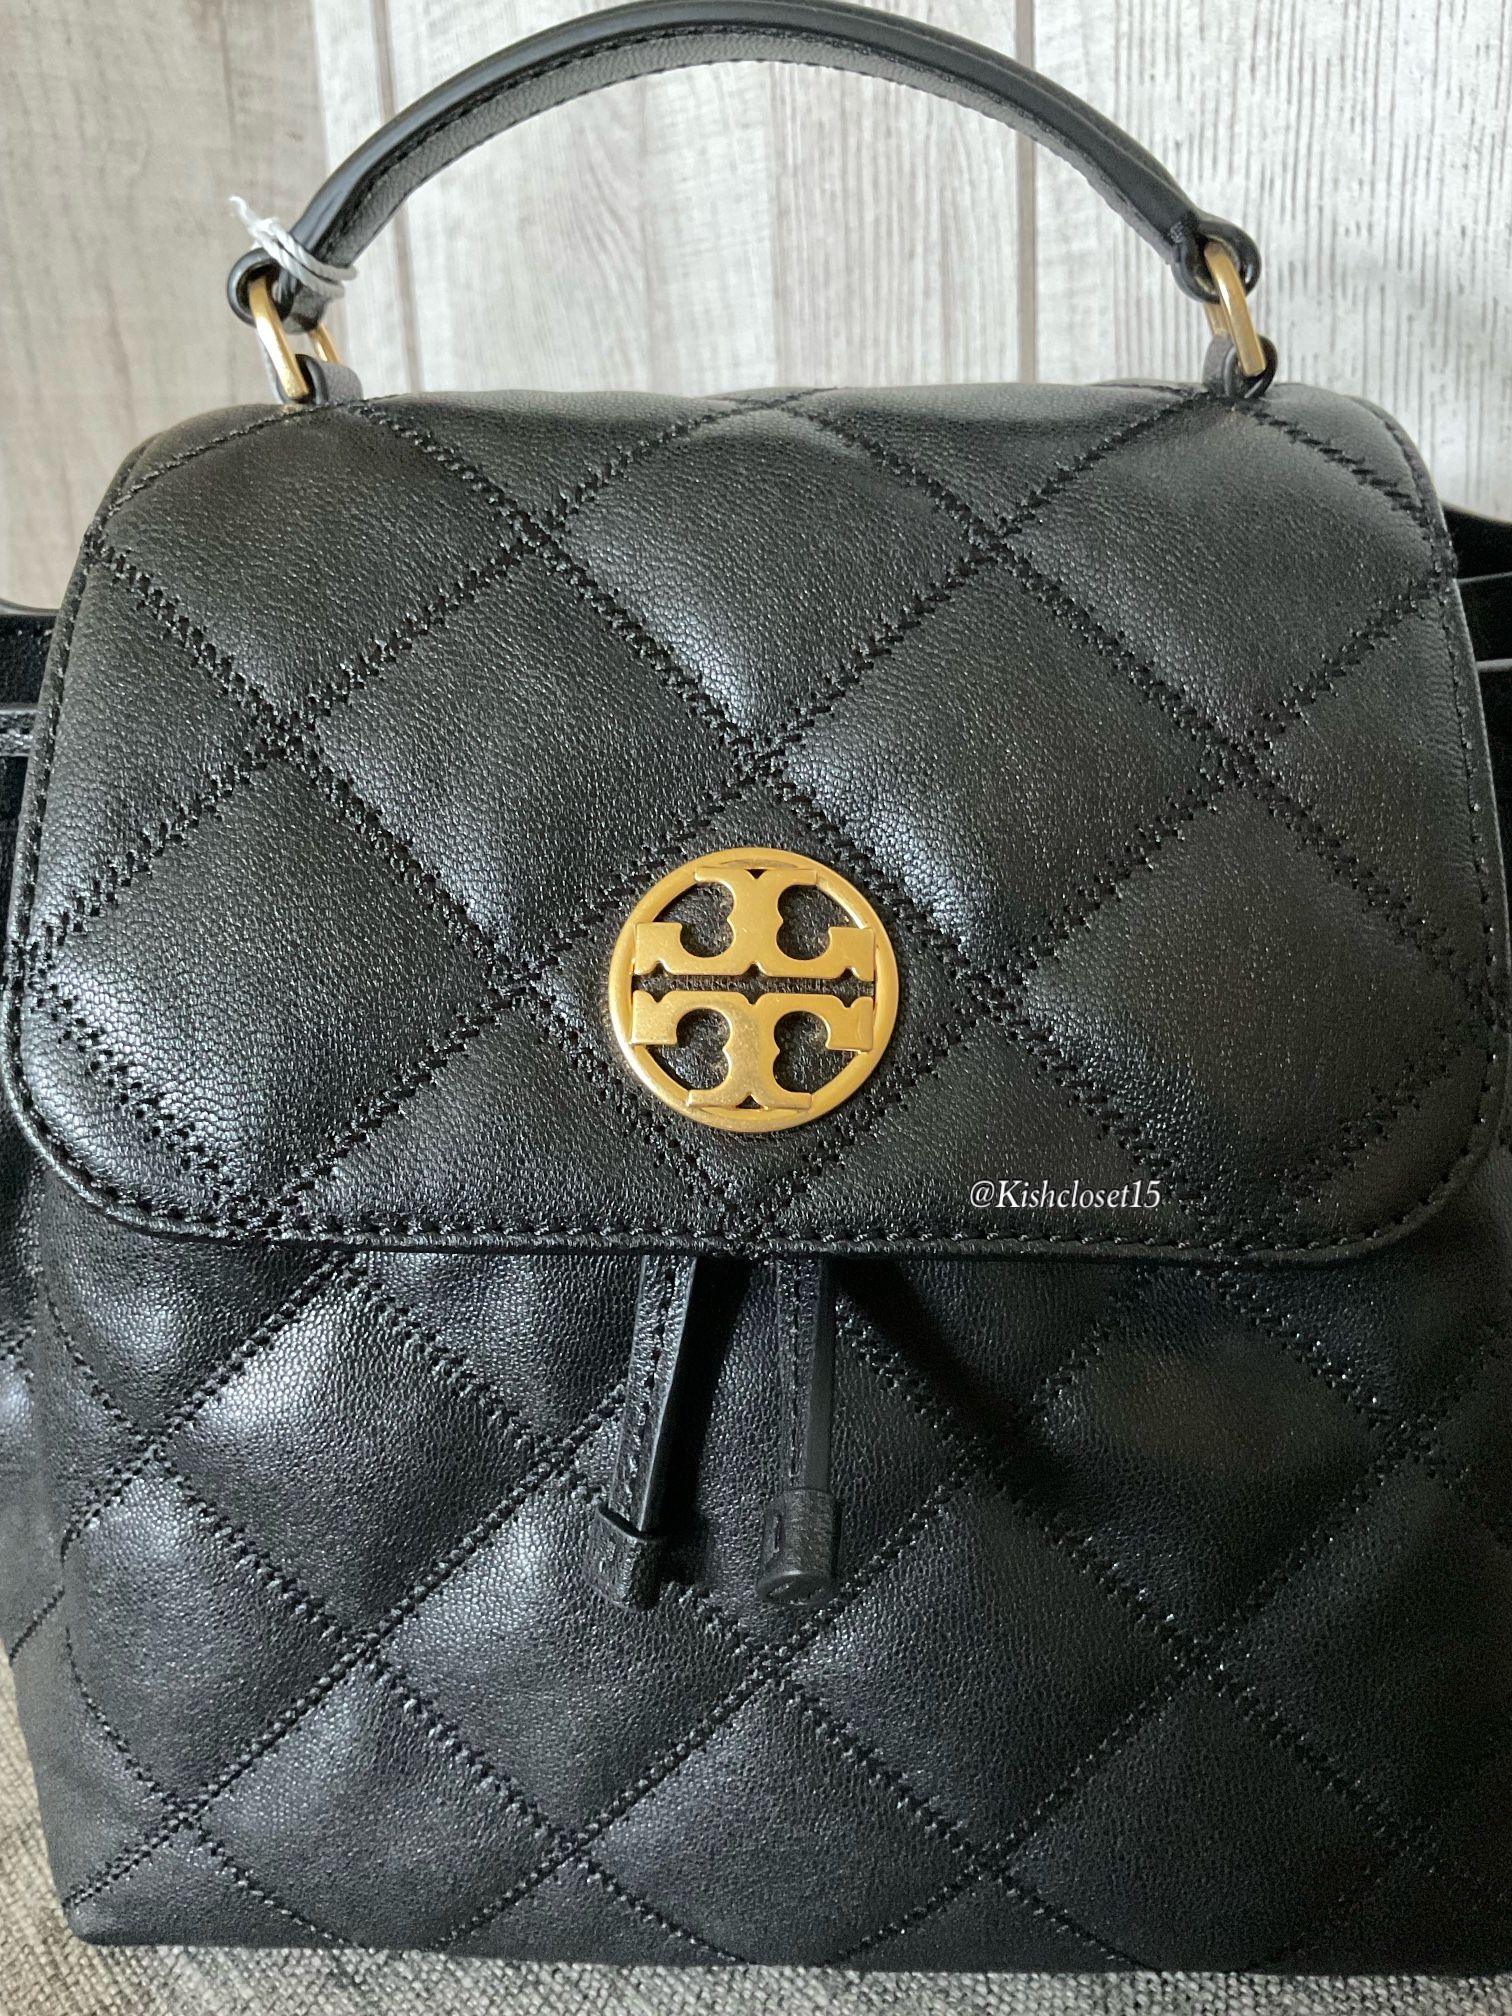 Tory Burch Backpack for Sale in Lacey, WA - OfferUp